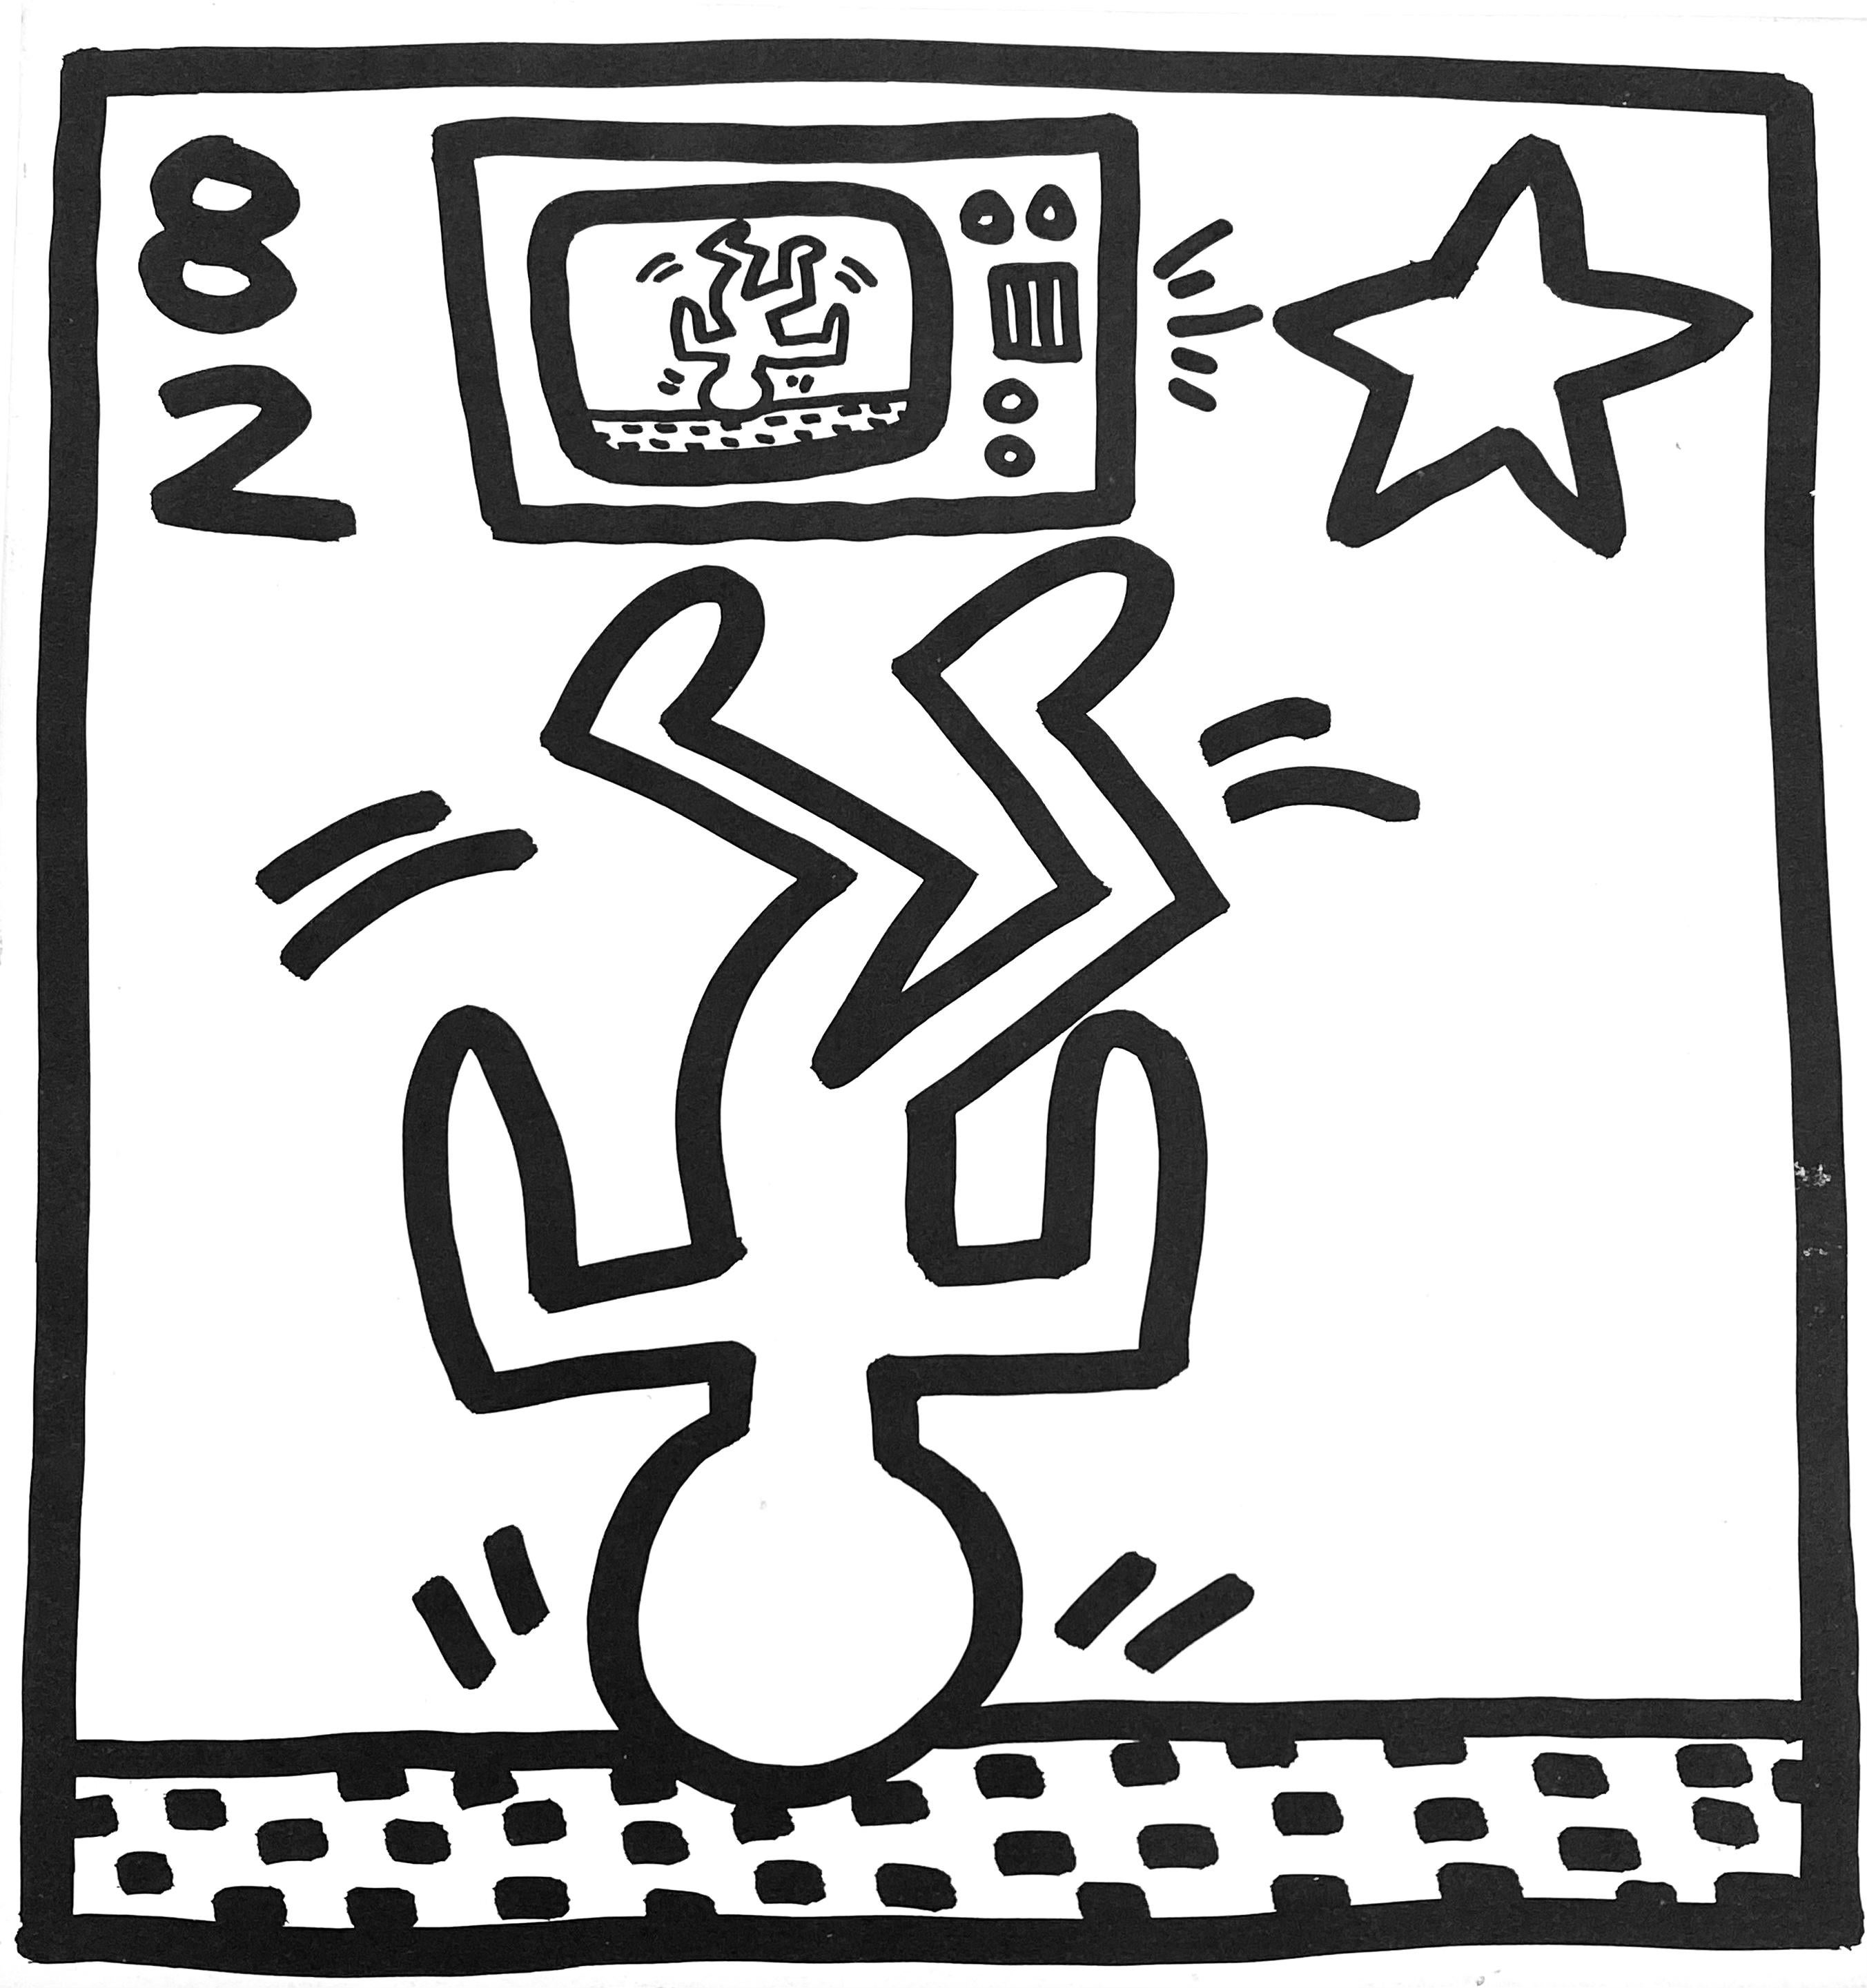 Keith Haring (untitled) lithograph 1982 (Keith Haring prints) - Pop Art Print by (after) Keith Haring